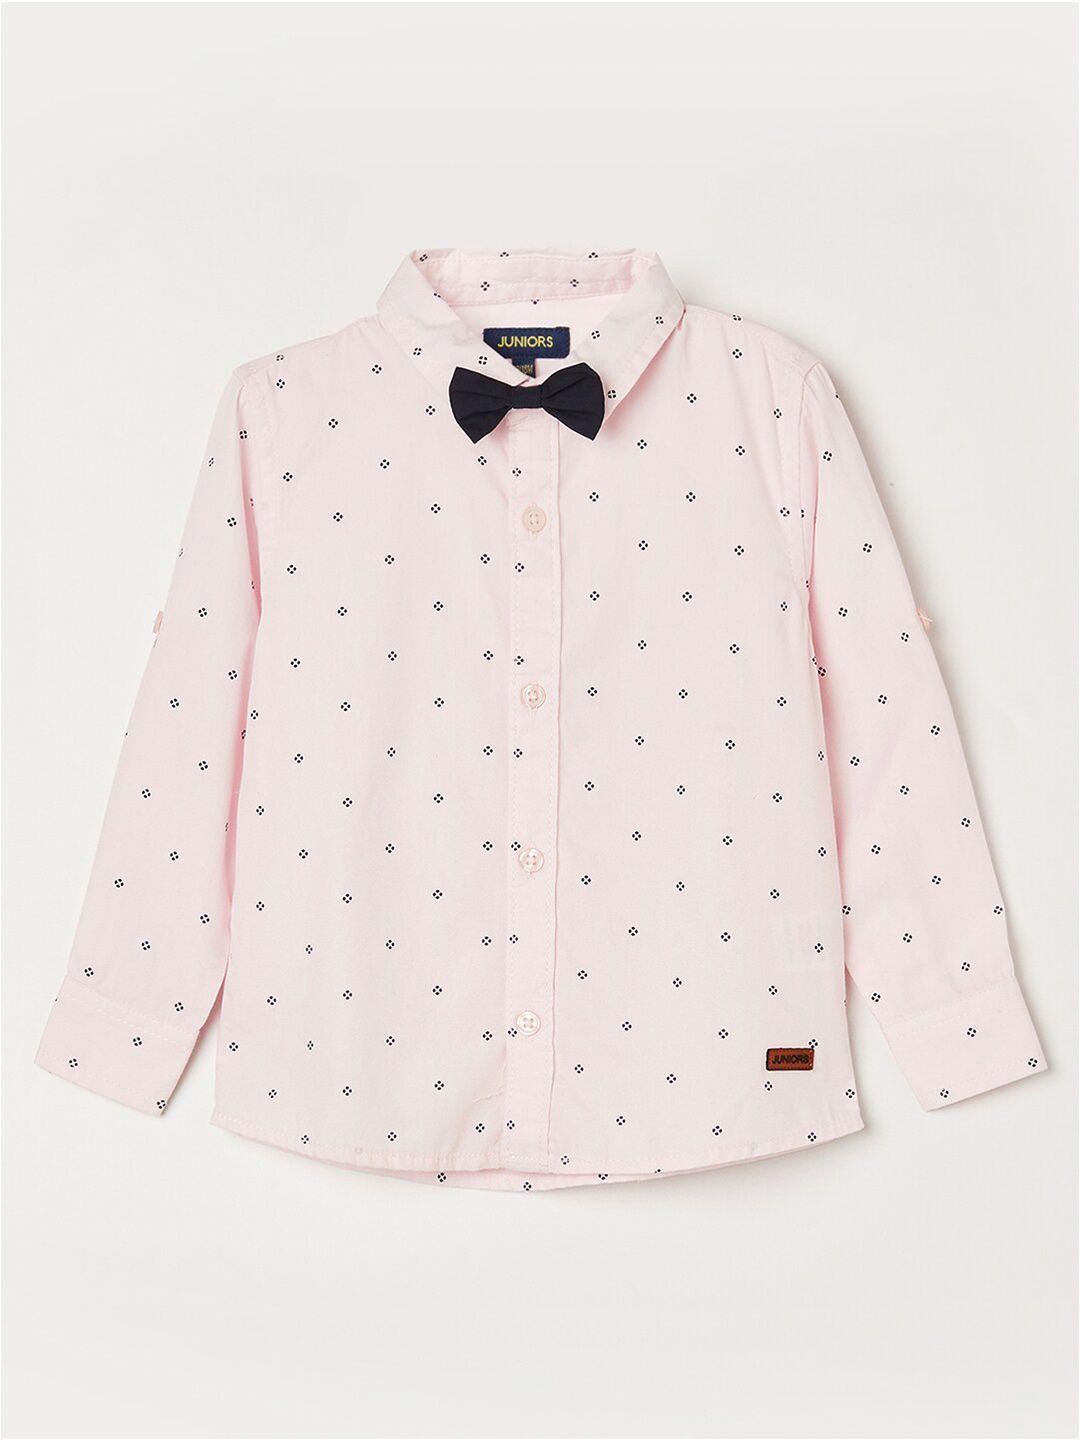 juniors-by-lifestyle-boys-cotton-printed-casual-shirt